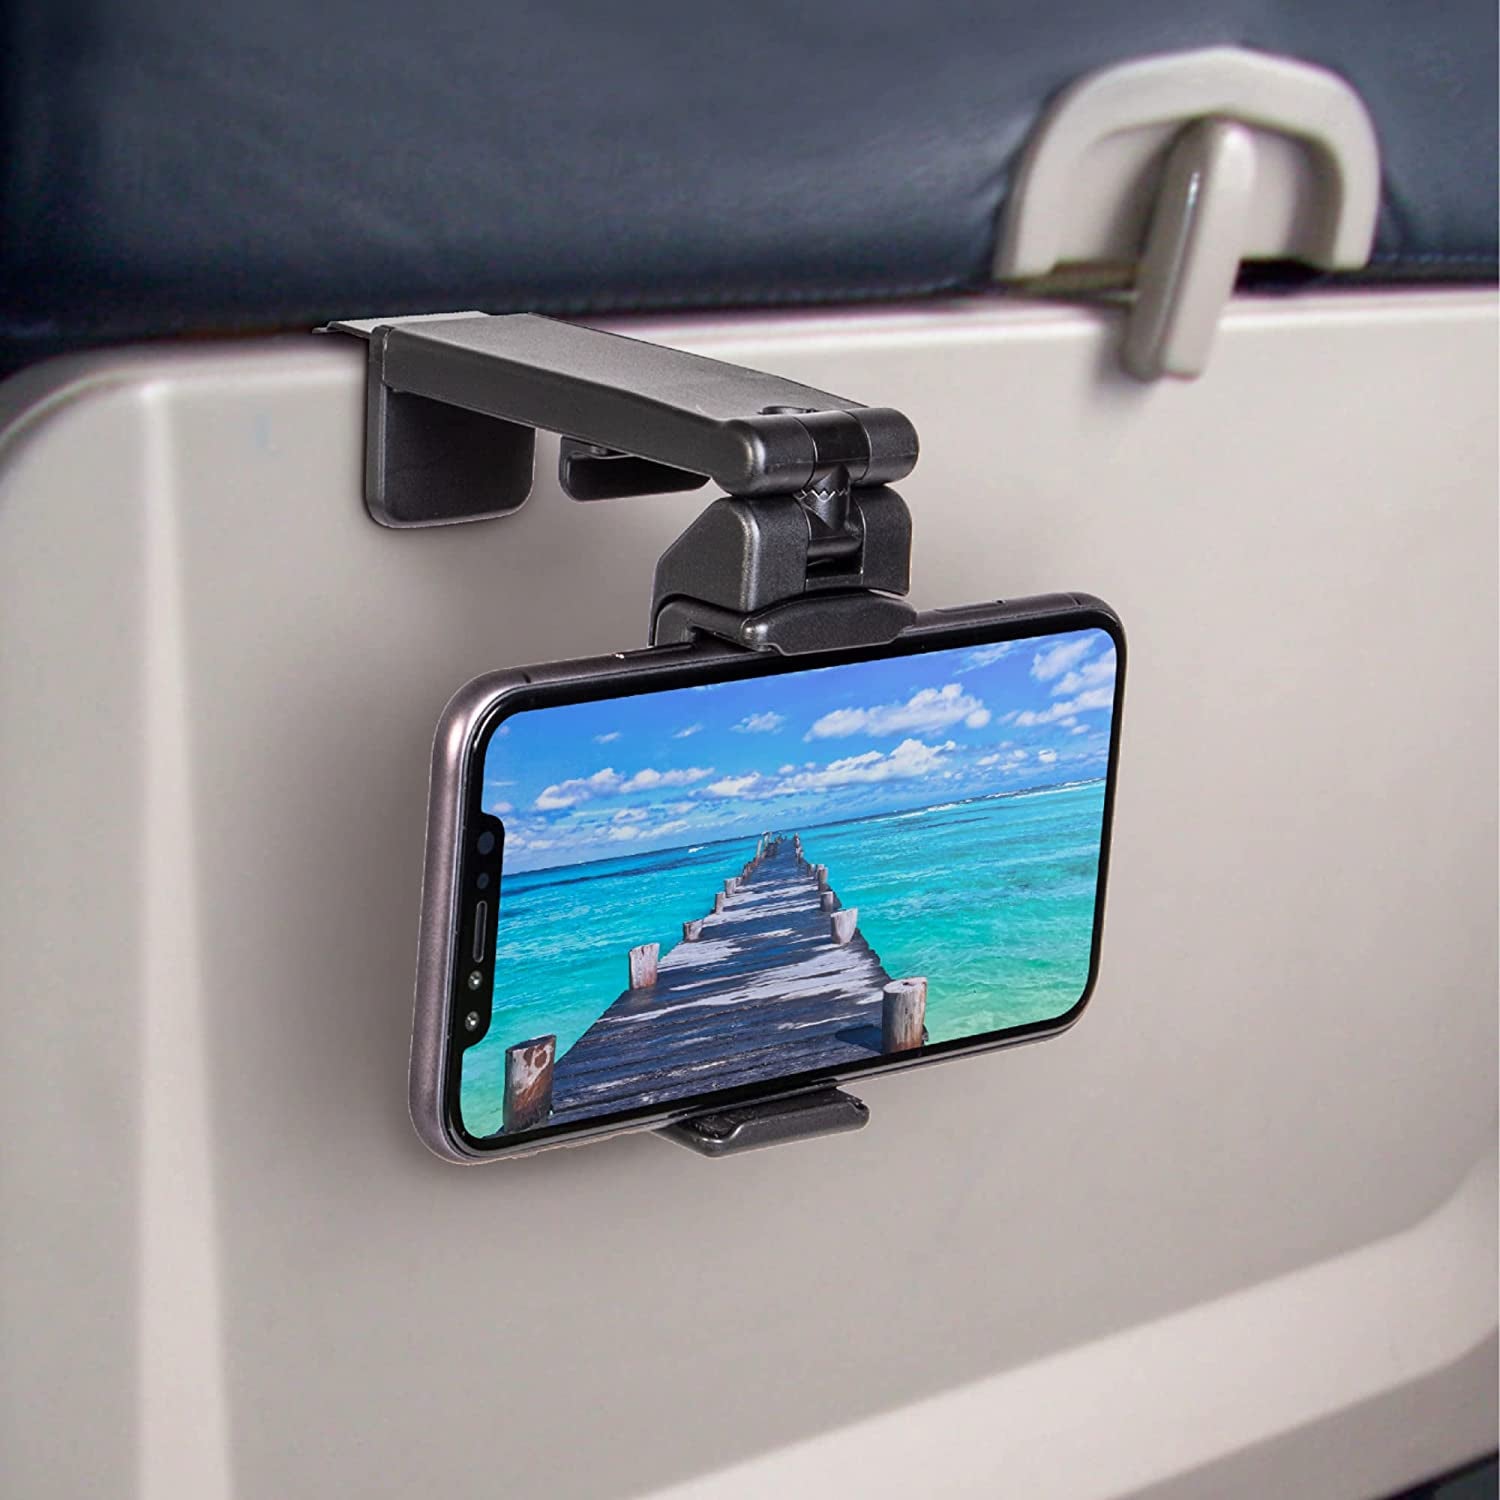 a phone mount on the back of an airplane tray